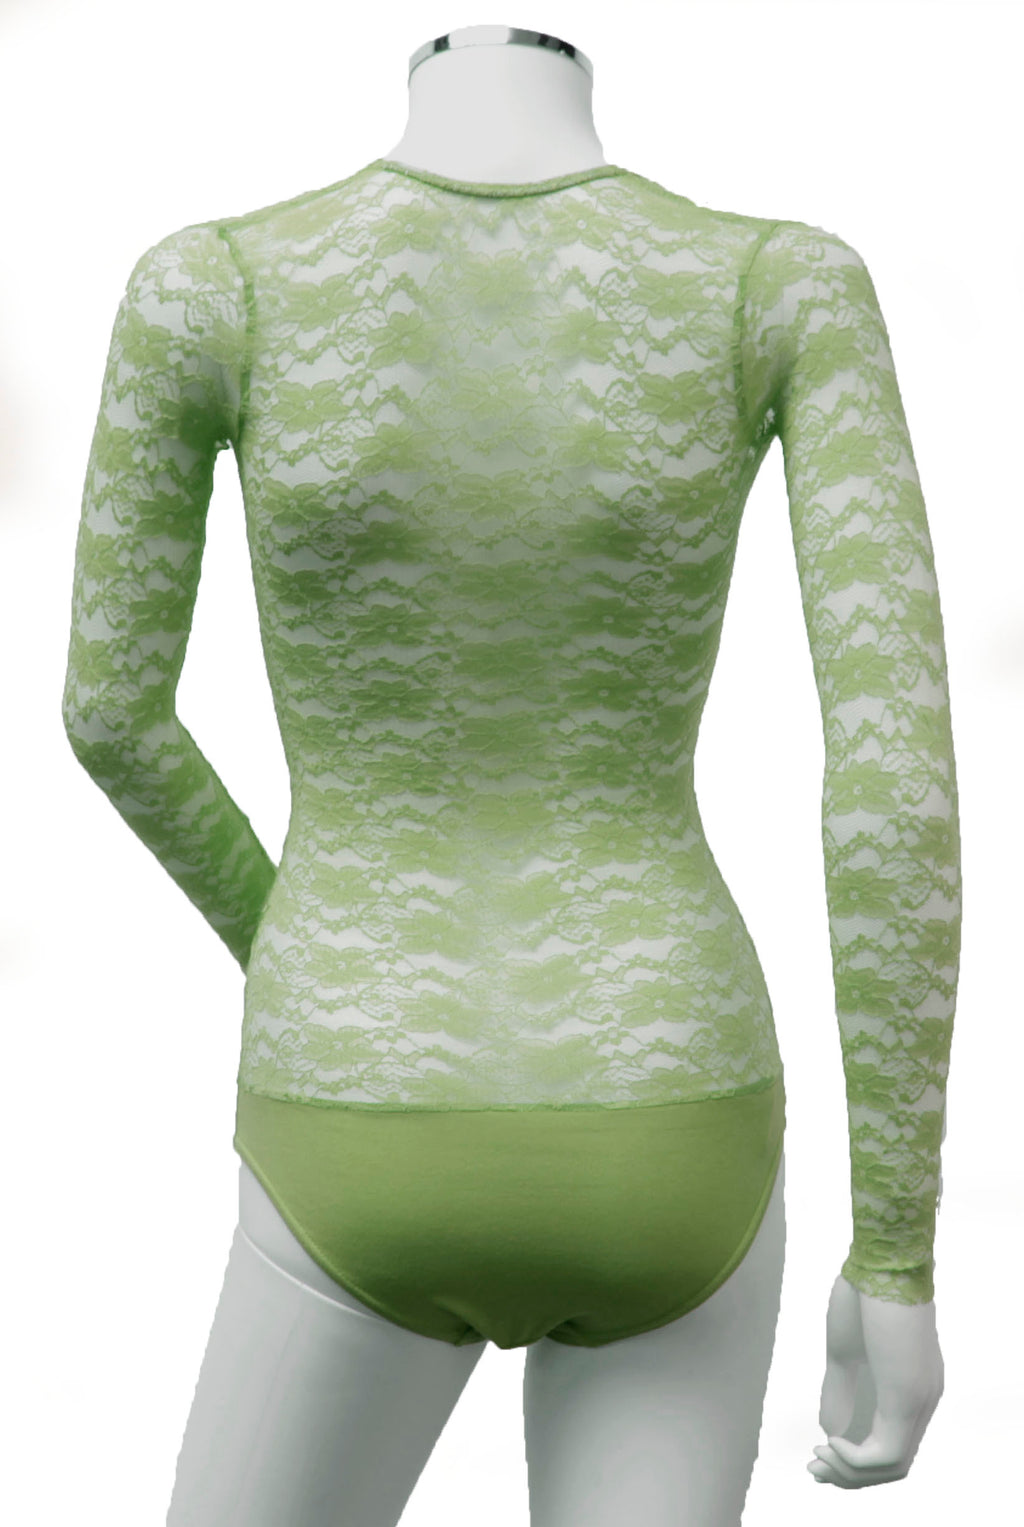 Underbust with Sleeves - Olive Lace